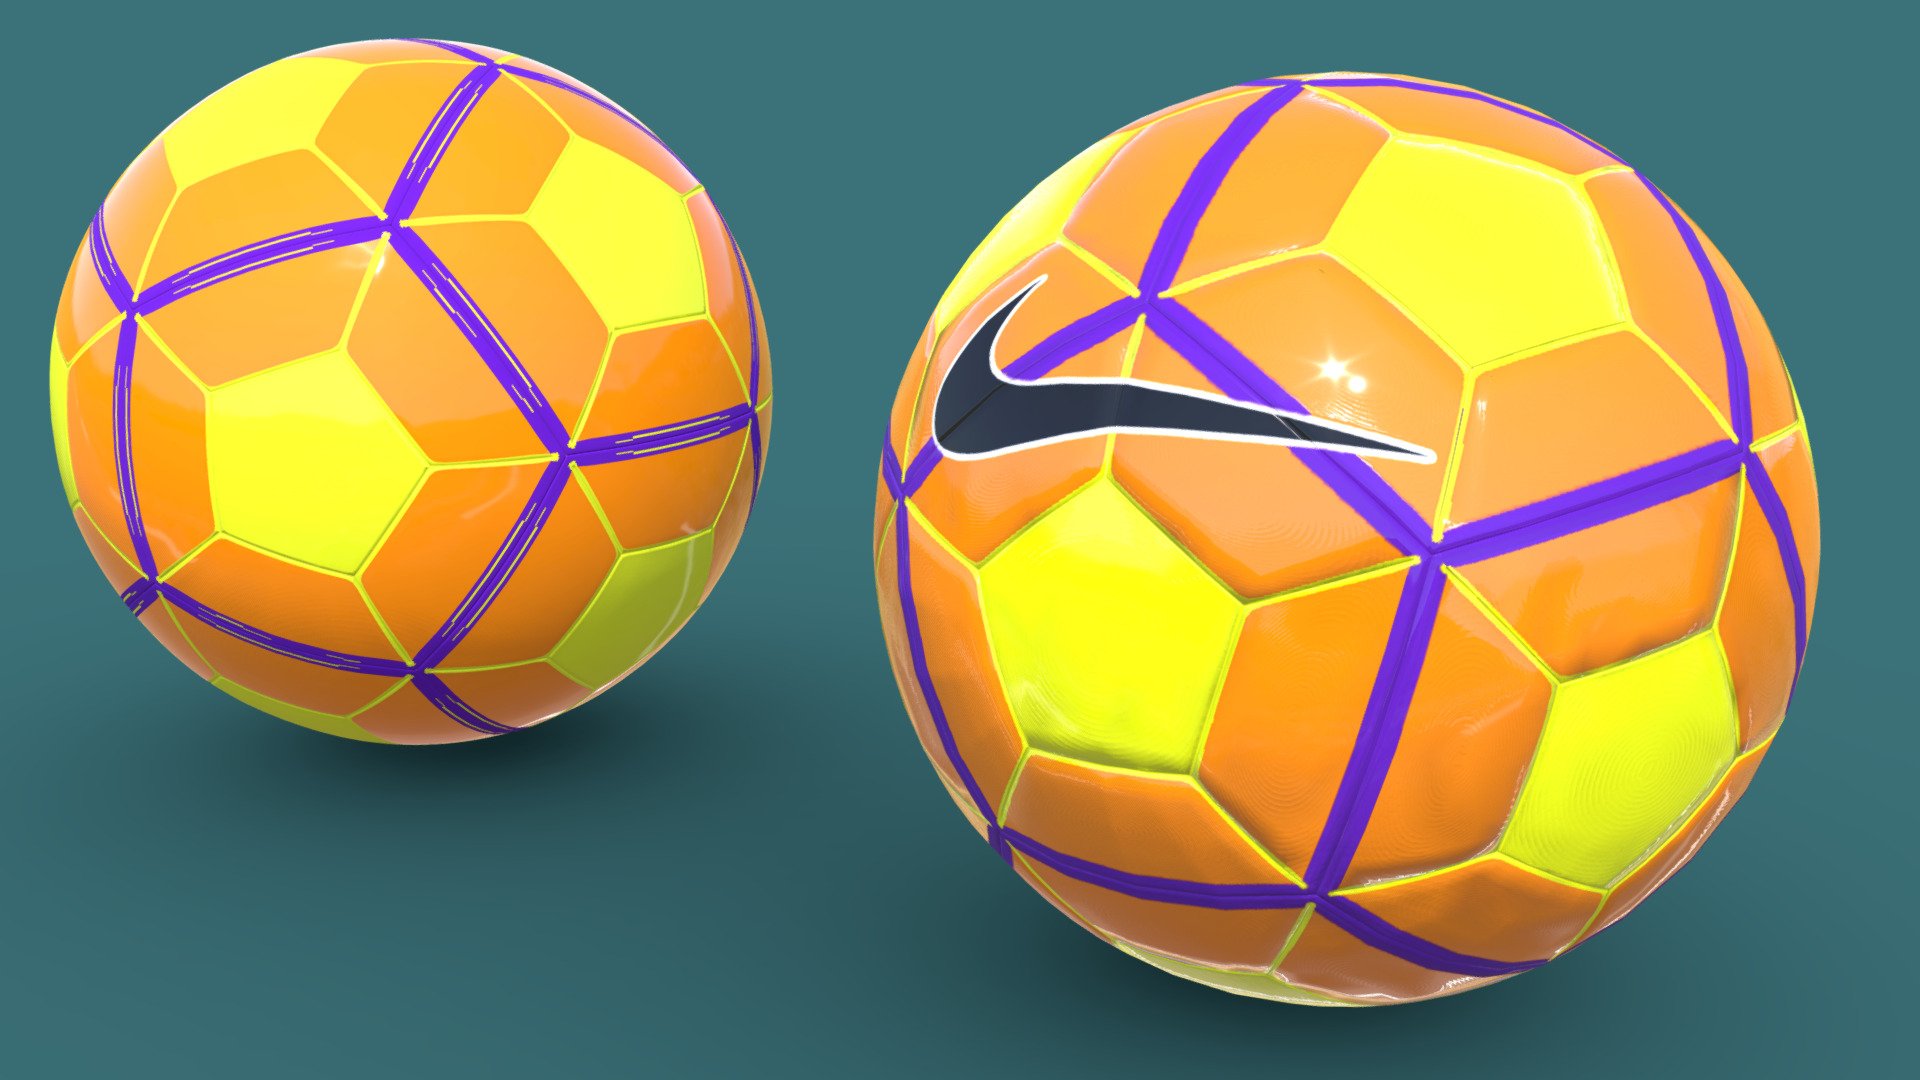 Versions: High Poly UVMapped Low Poly Unwrapped

Source MAX Model included Ready for Subdiv

PBR Textures for reference

This is not a printable model

The Nike Ordem is a brand of association footballs designed by Nike.[1] Variations of the design have been produced for various competitions including the Premier League, Serie A, La Liga, Campeonato Brasileiro Série A, the National Women's Soccer League, the 2015 AFC Asian Cup, the 2015 Copa Libertadores, 2015 Copa América (Nike Cachaña) and Copa América Centenario 3d model